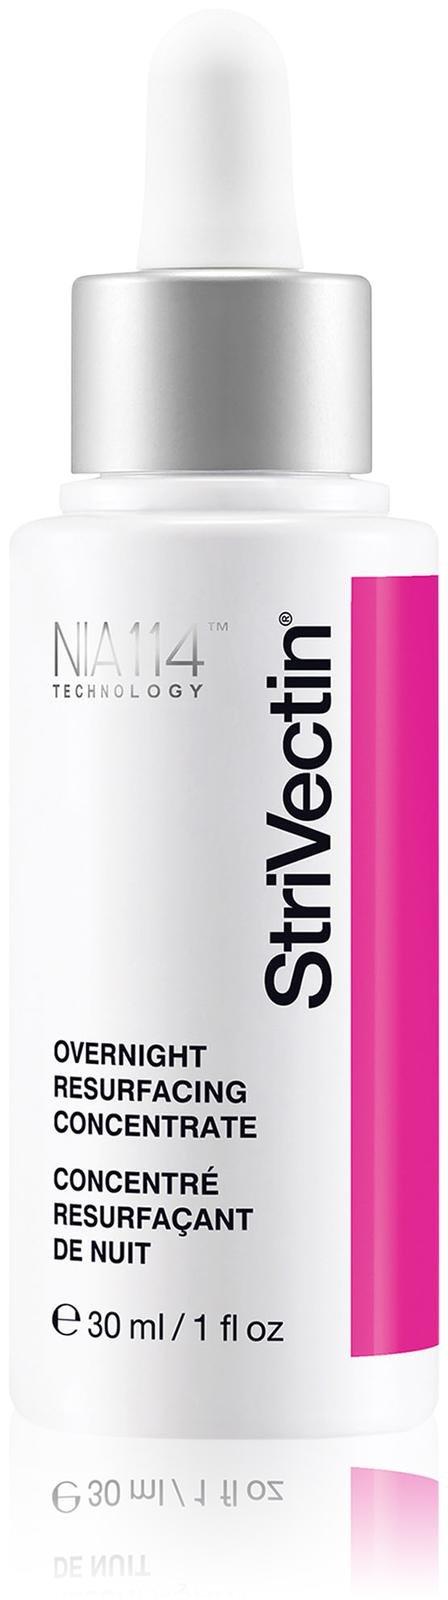 Strivectin Overnight Resurfacing Concentrate - 1 Oz